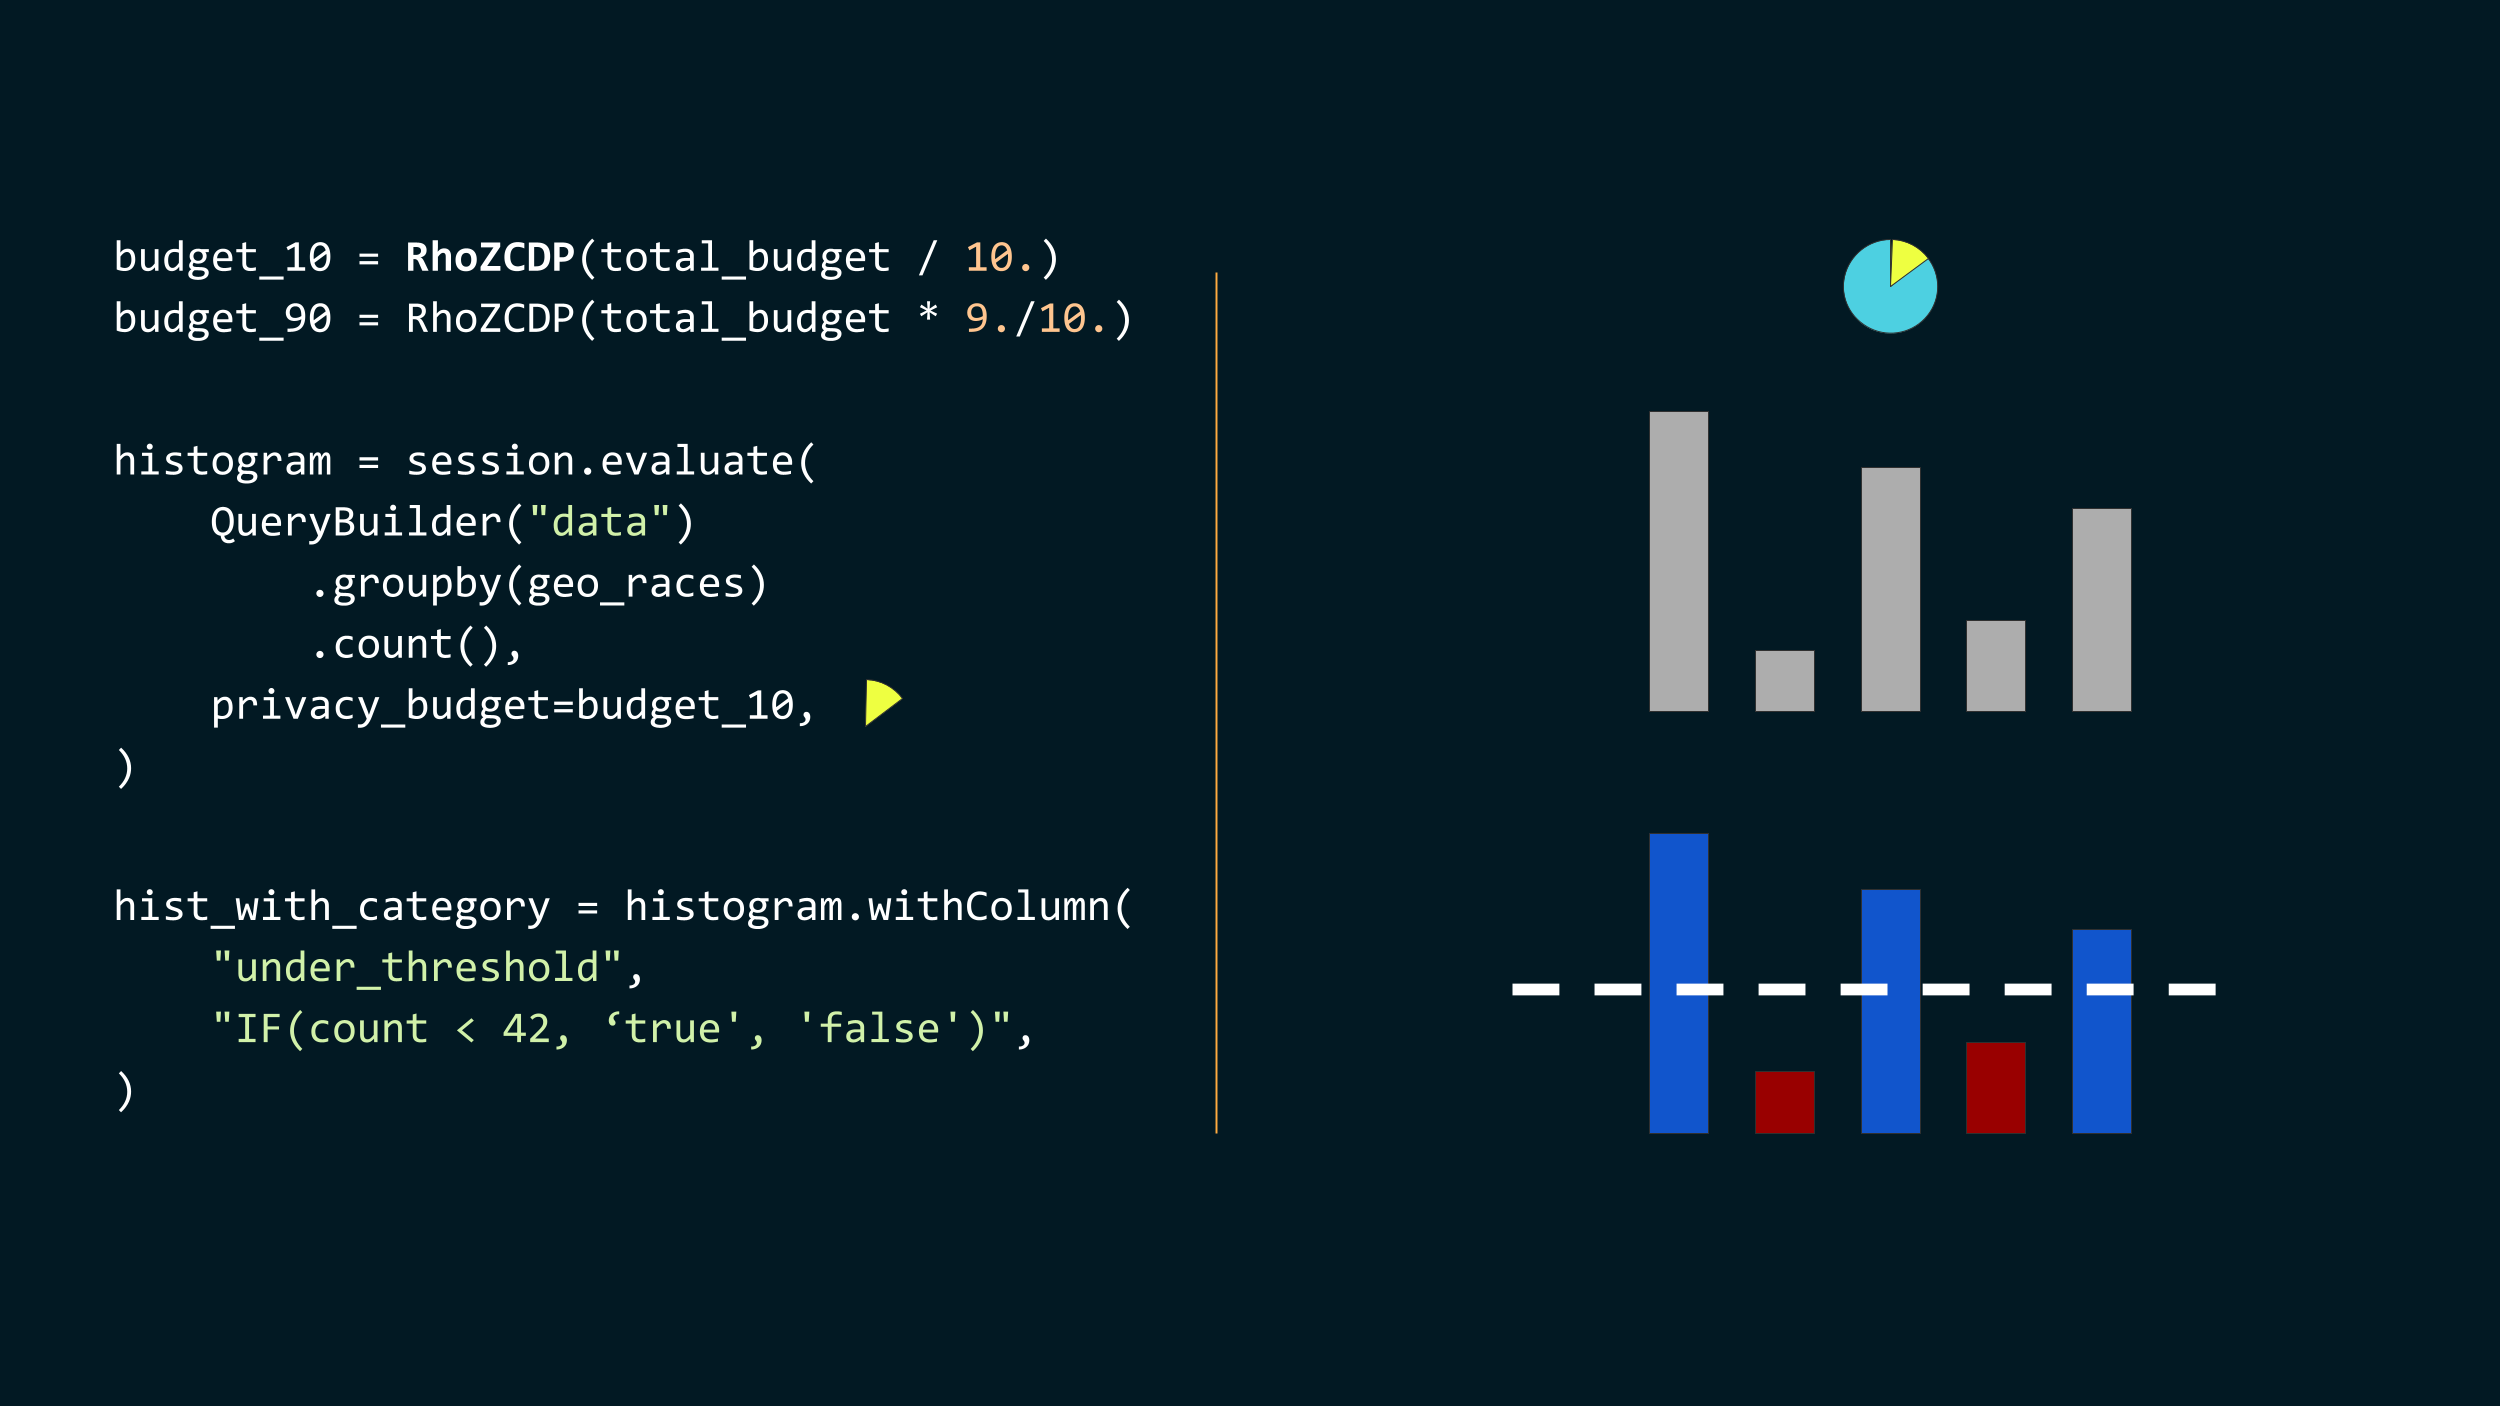 Three code snippets with accompanying visuals. //
budget_10 = RhoZCDP(total_budget / 10.)
budget_90 = RhoZCDP(total_budget * 9./10.)
This is represented by a pie chart splitting a disc in 1/10 and 9/10. //
histogram = session.evaluate(
    QueryBuilder("data")
        .groupby(geo_races)
        .count(),
    privacy_budget=budget_10,
)
This is represented by a histogram, and uses the 1/10 part of the privacy budget
pie. //
hist_with_category = histogram.withColumn(
    "under_threshold",
    "IF(count < 42, ‘true', 'false')",
)
This is represented by the same histogram, with a horizontal dashed line
determining whether each bucket is above and below, and marking it with
different colors depending.